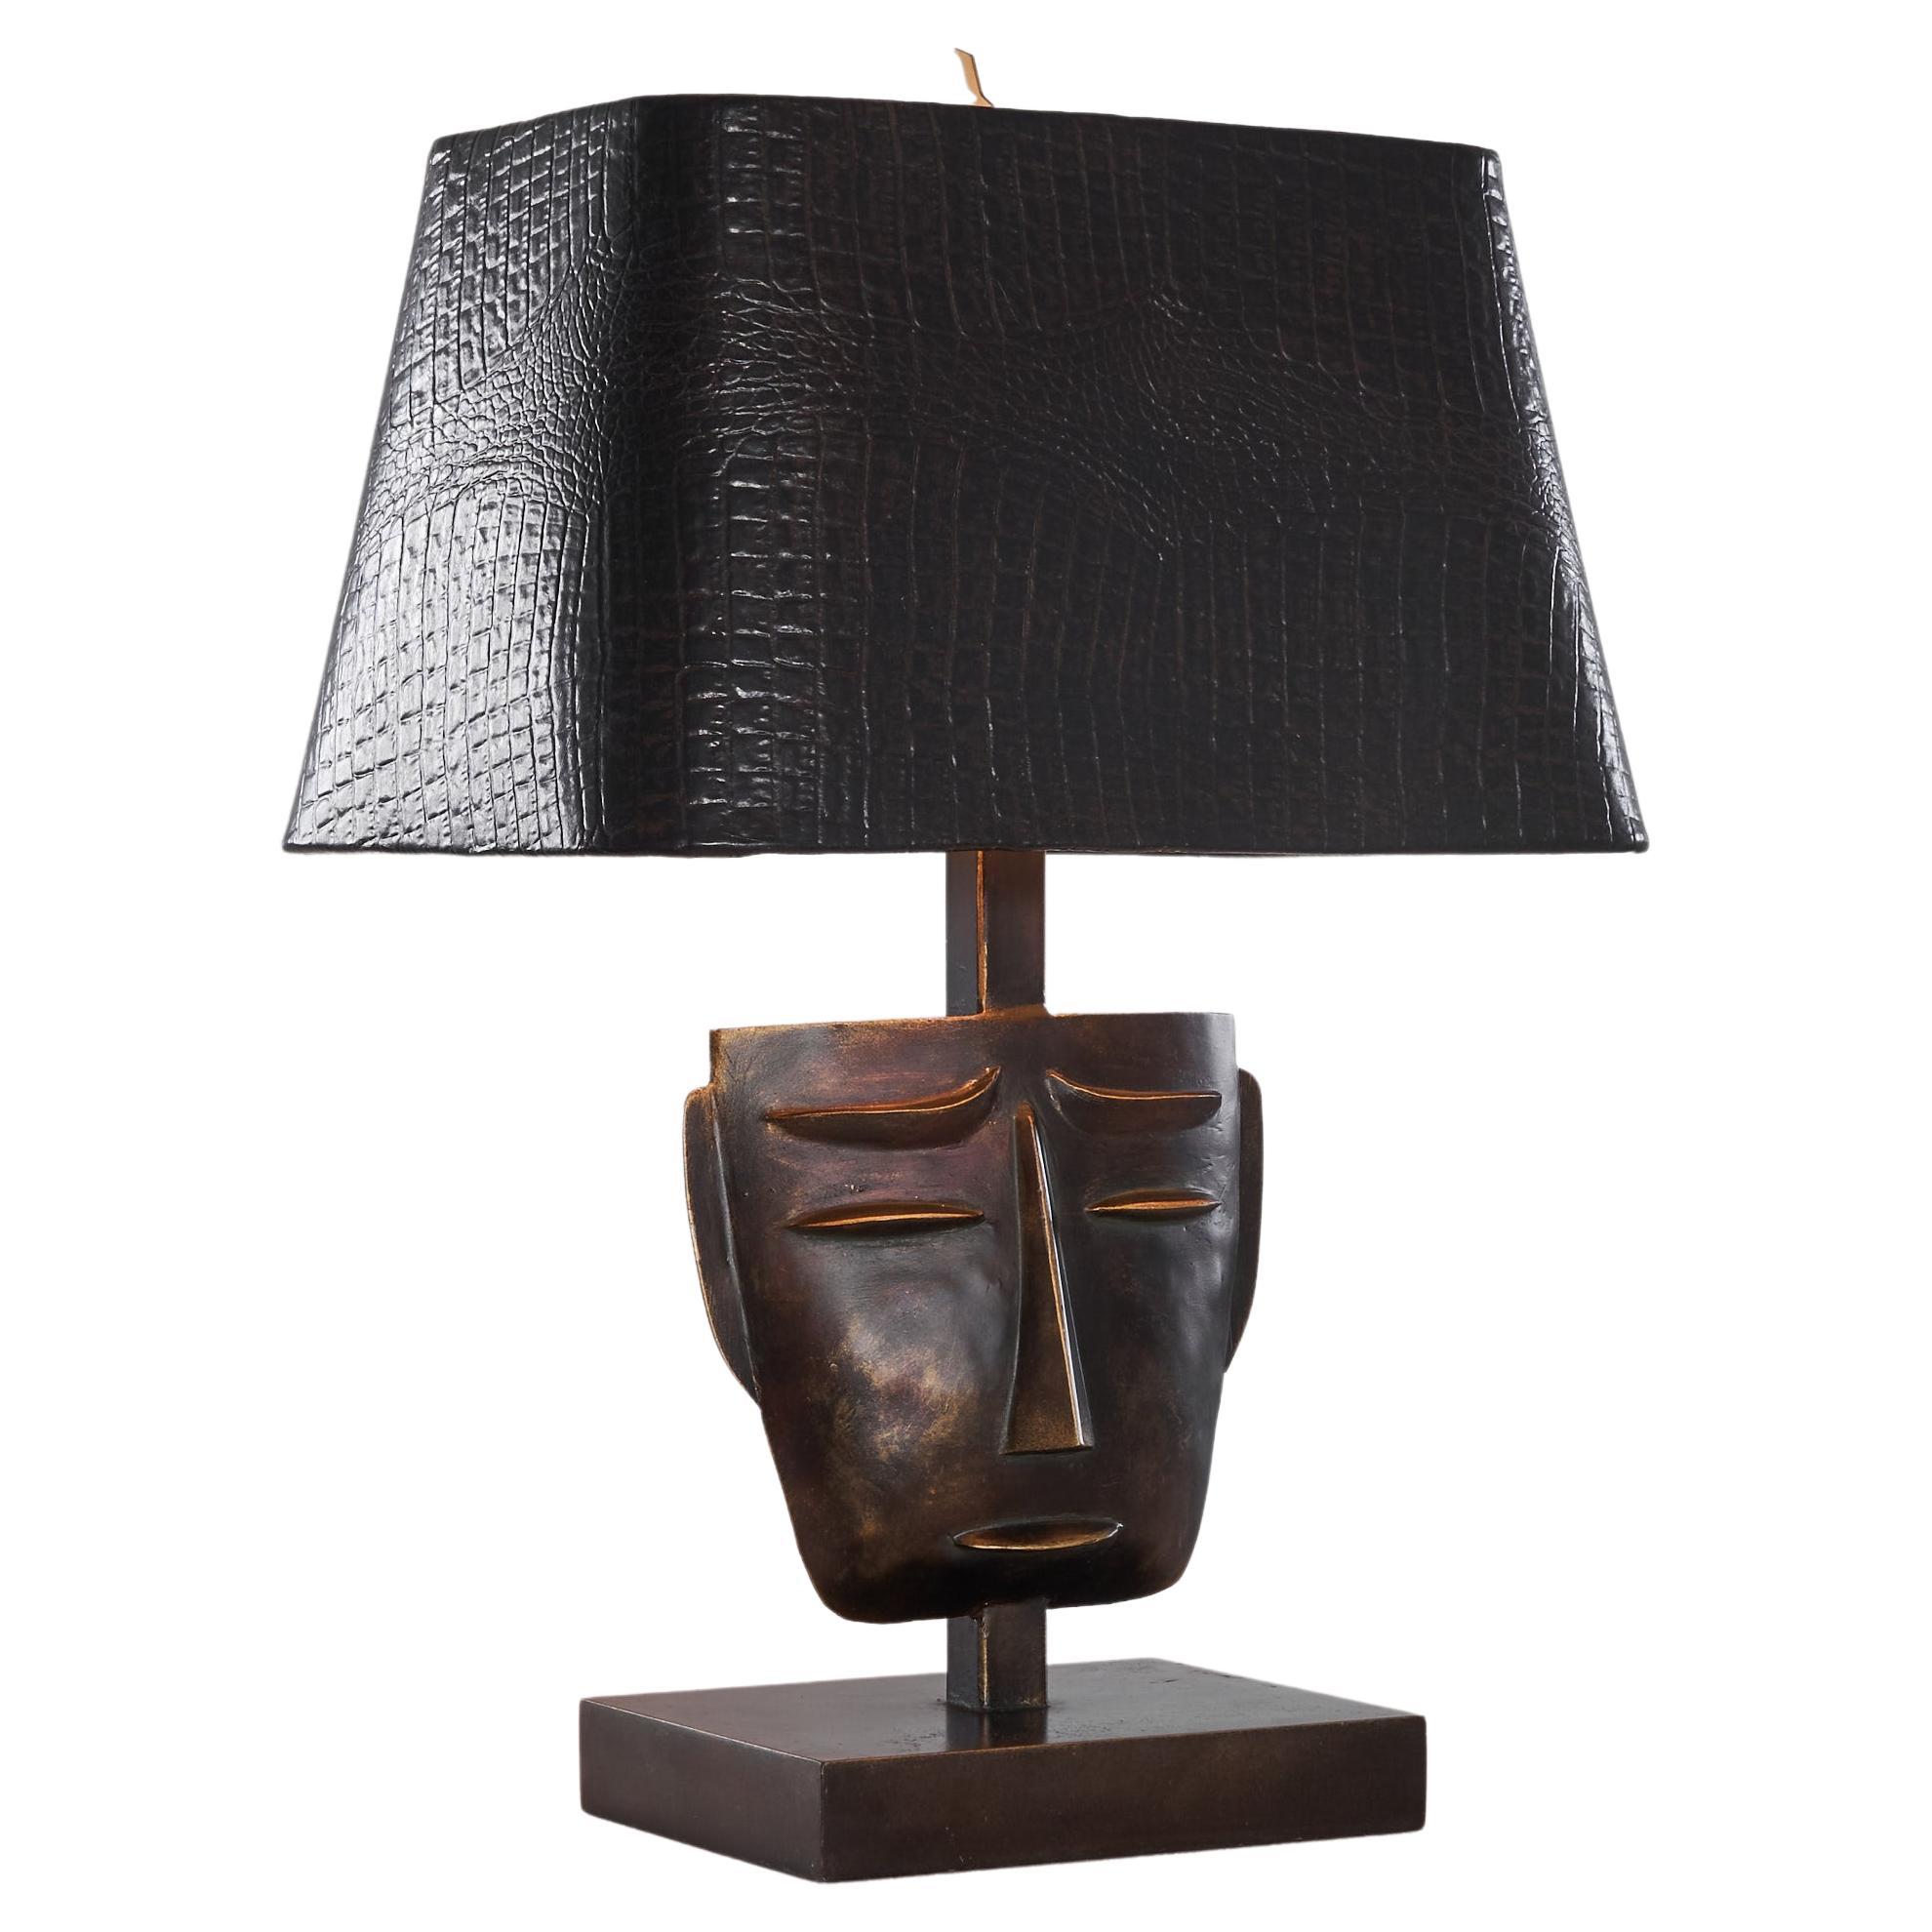 Lam Lee 'Visage' Table Lamp by Leeazanne 1990s For Sale